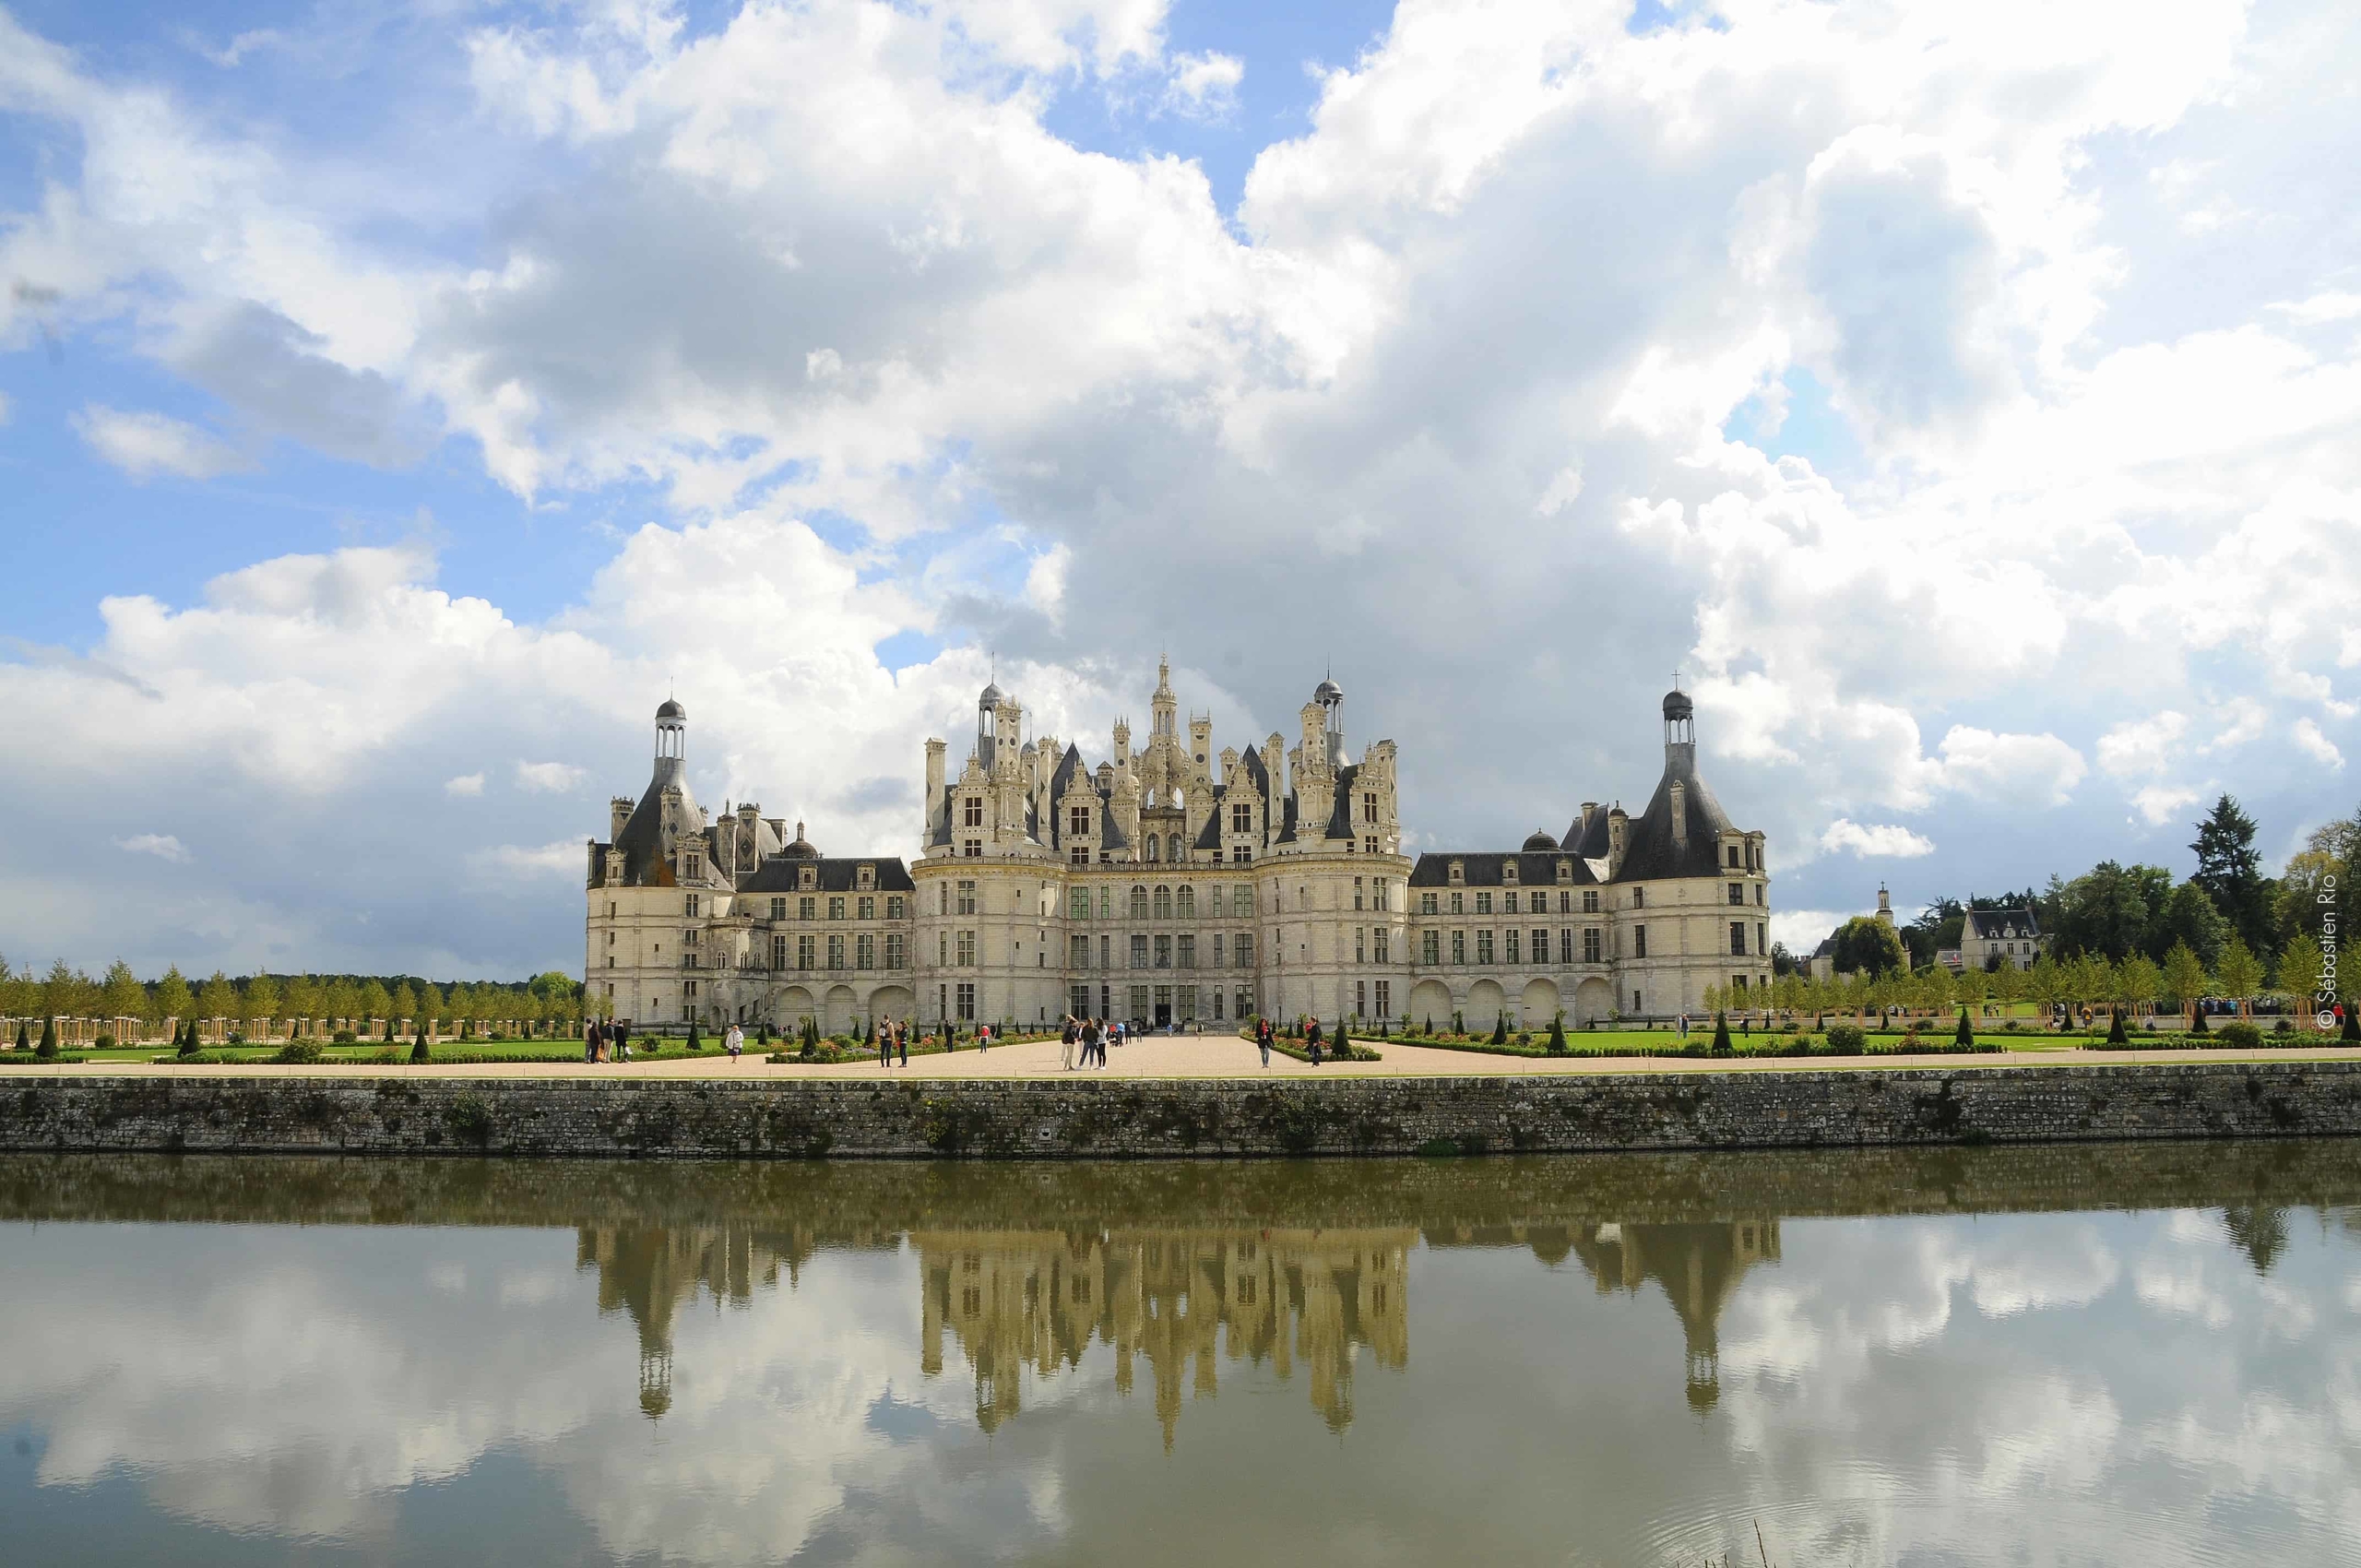 Château de Chambord: Travel guide and history - Snippets of Paris